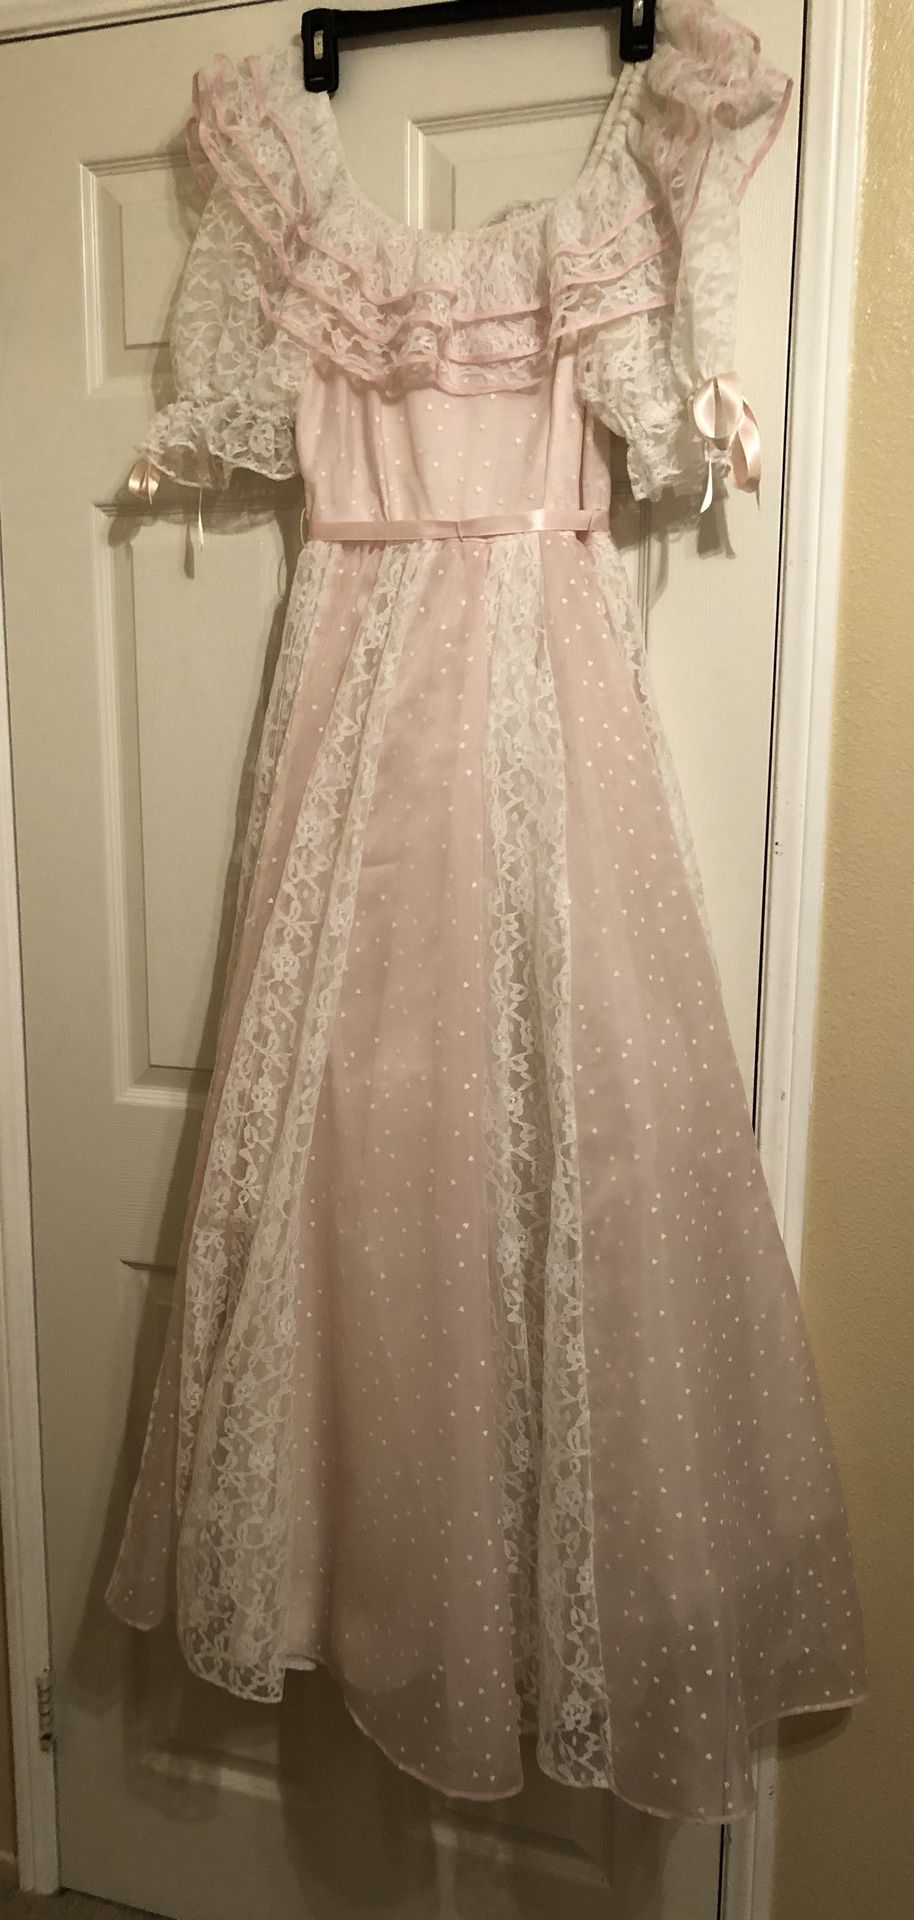 Women’s White Lace & Pink With White Hearts Vintage 1986 Prom Dress Size 5/6